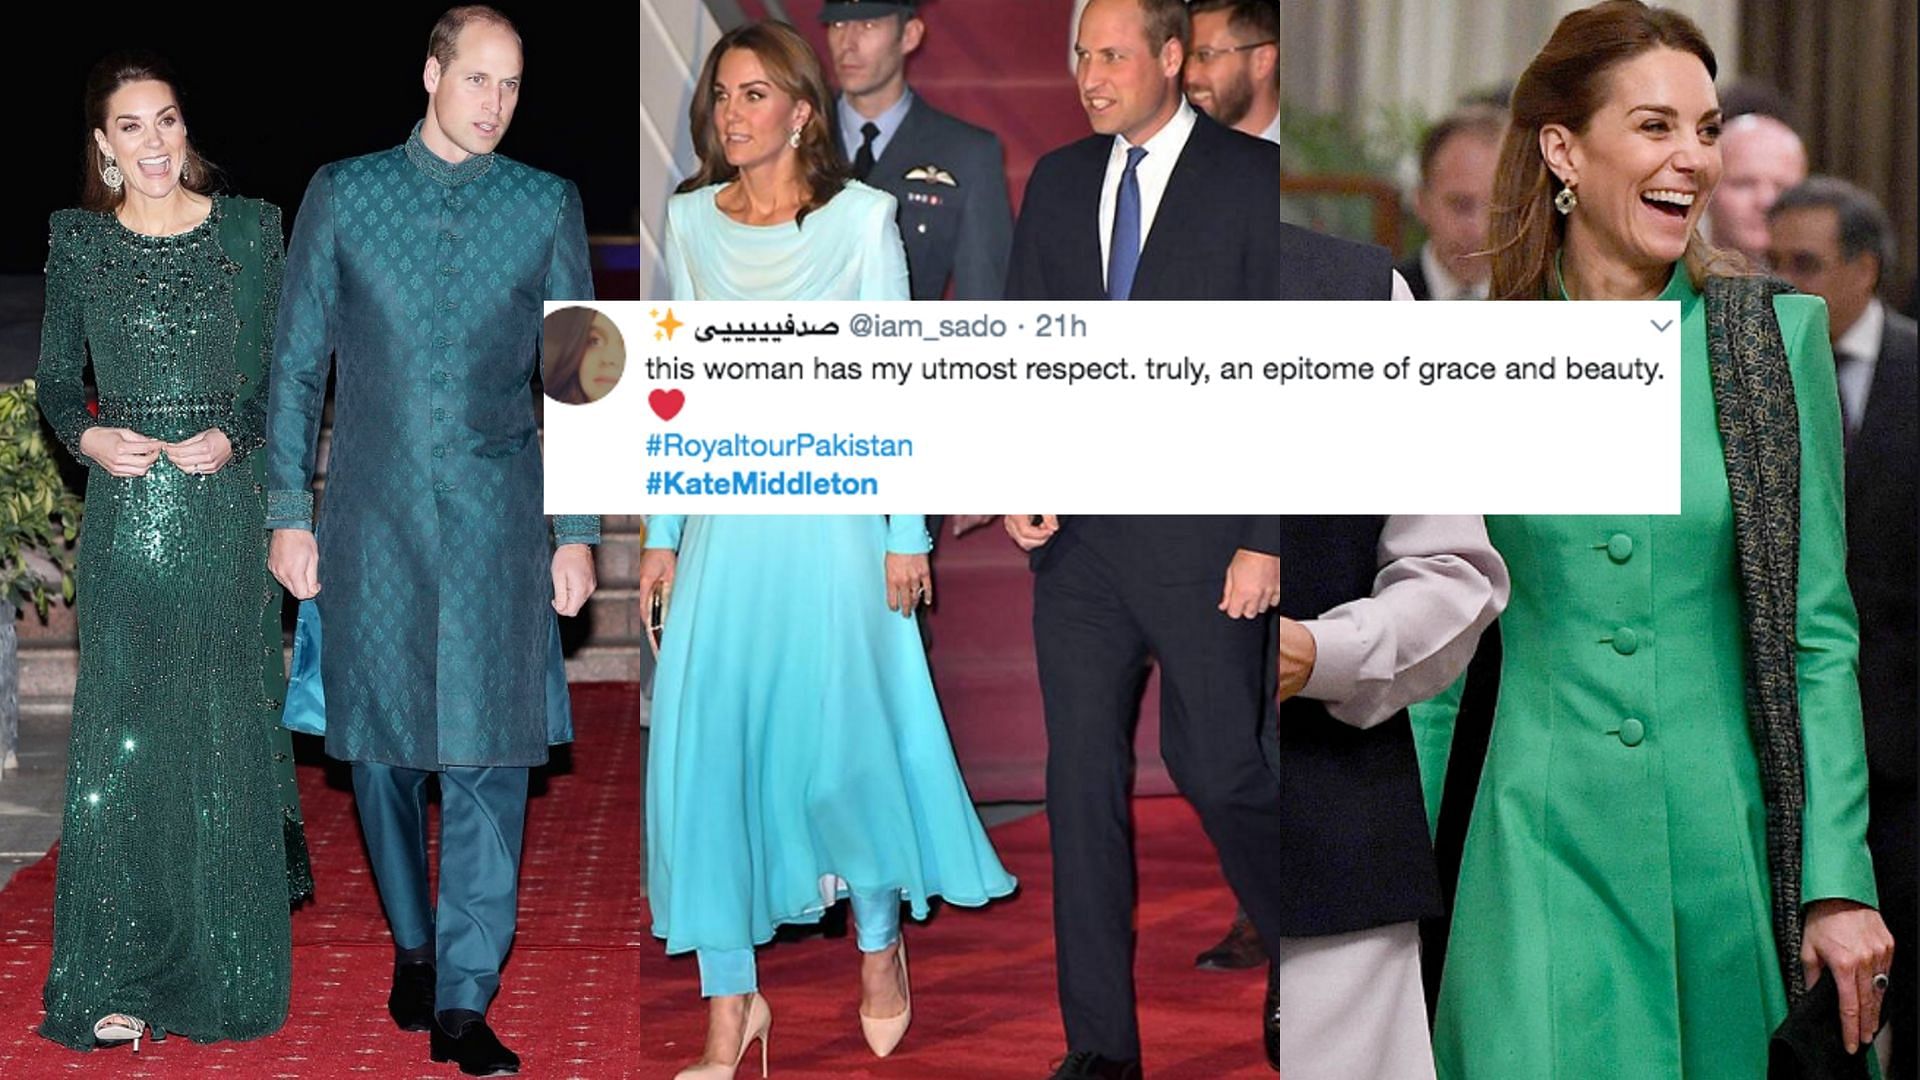 Kate Middleton dressed in these traditional outfits during the Duke and Duchess’ visit to Pakistan.